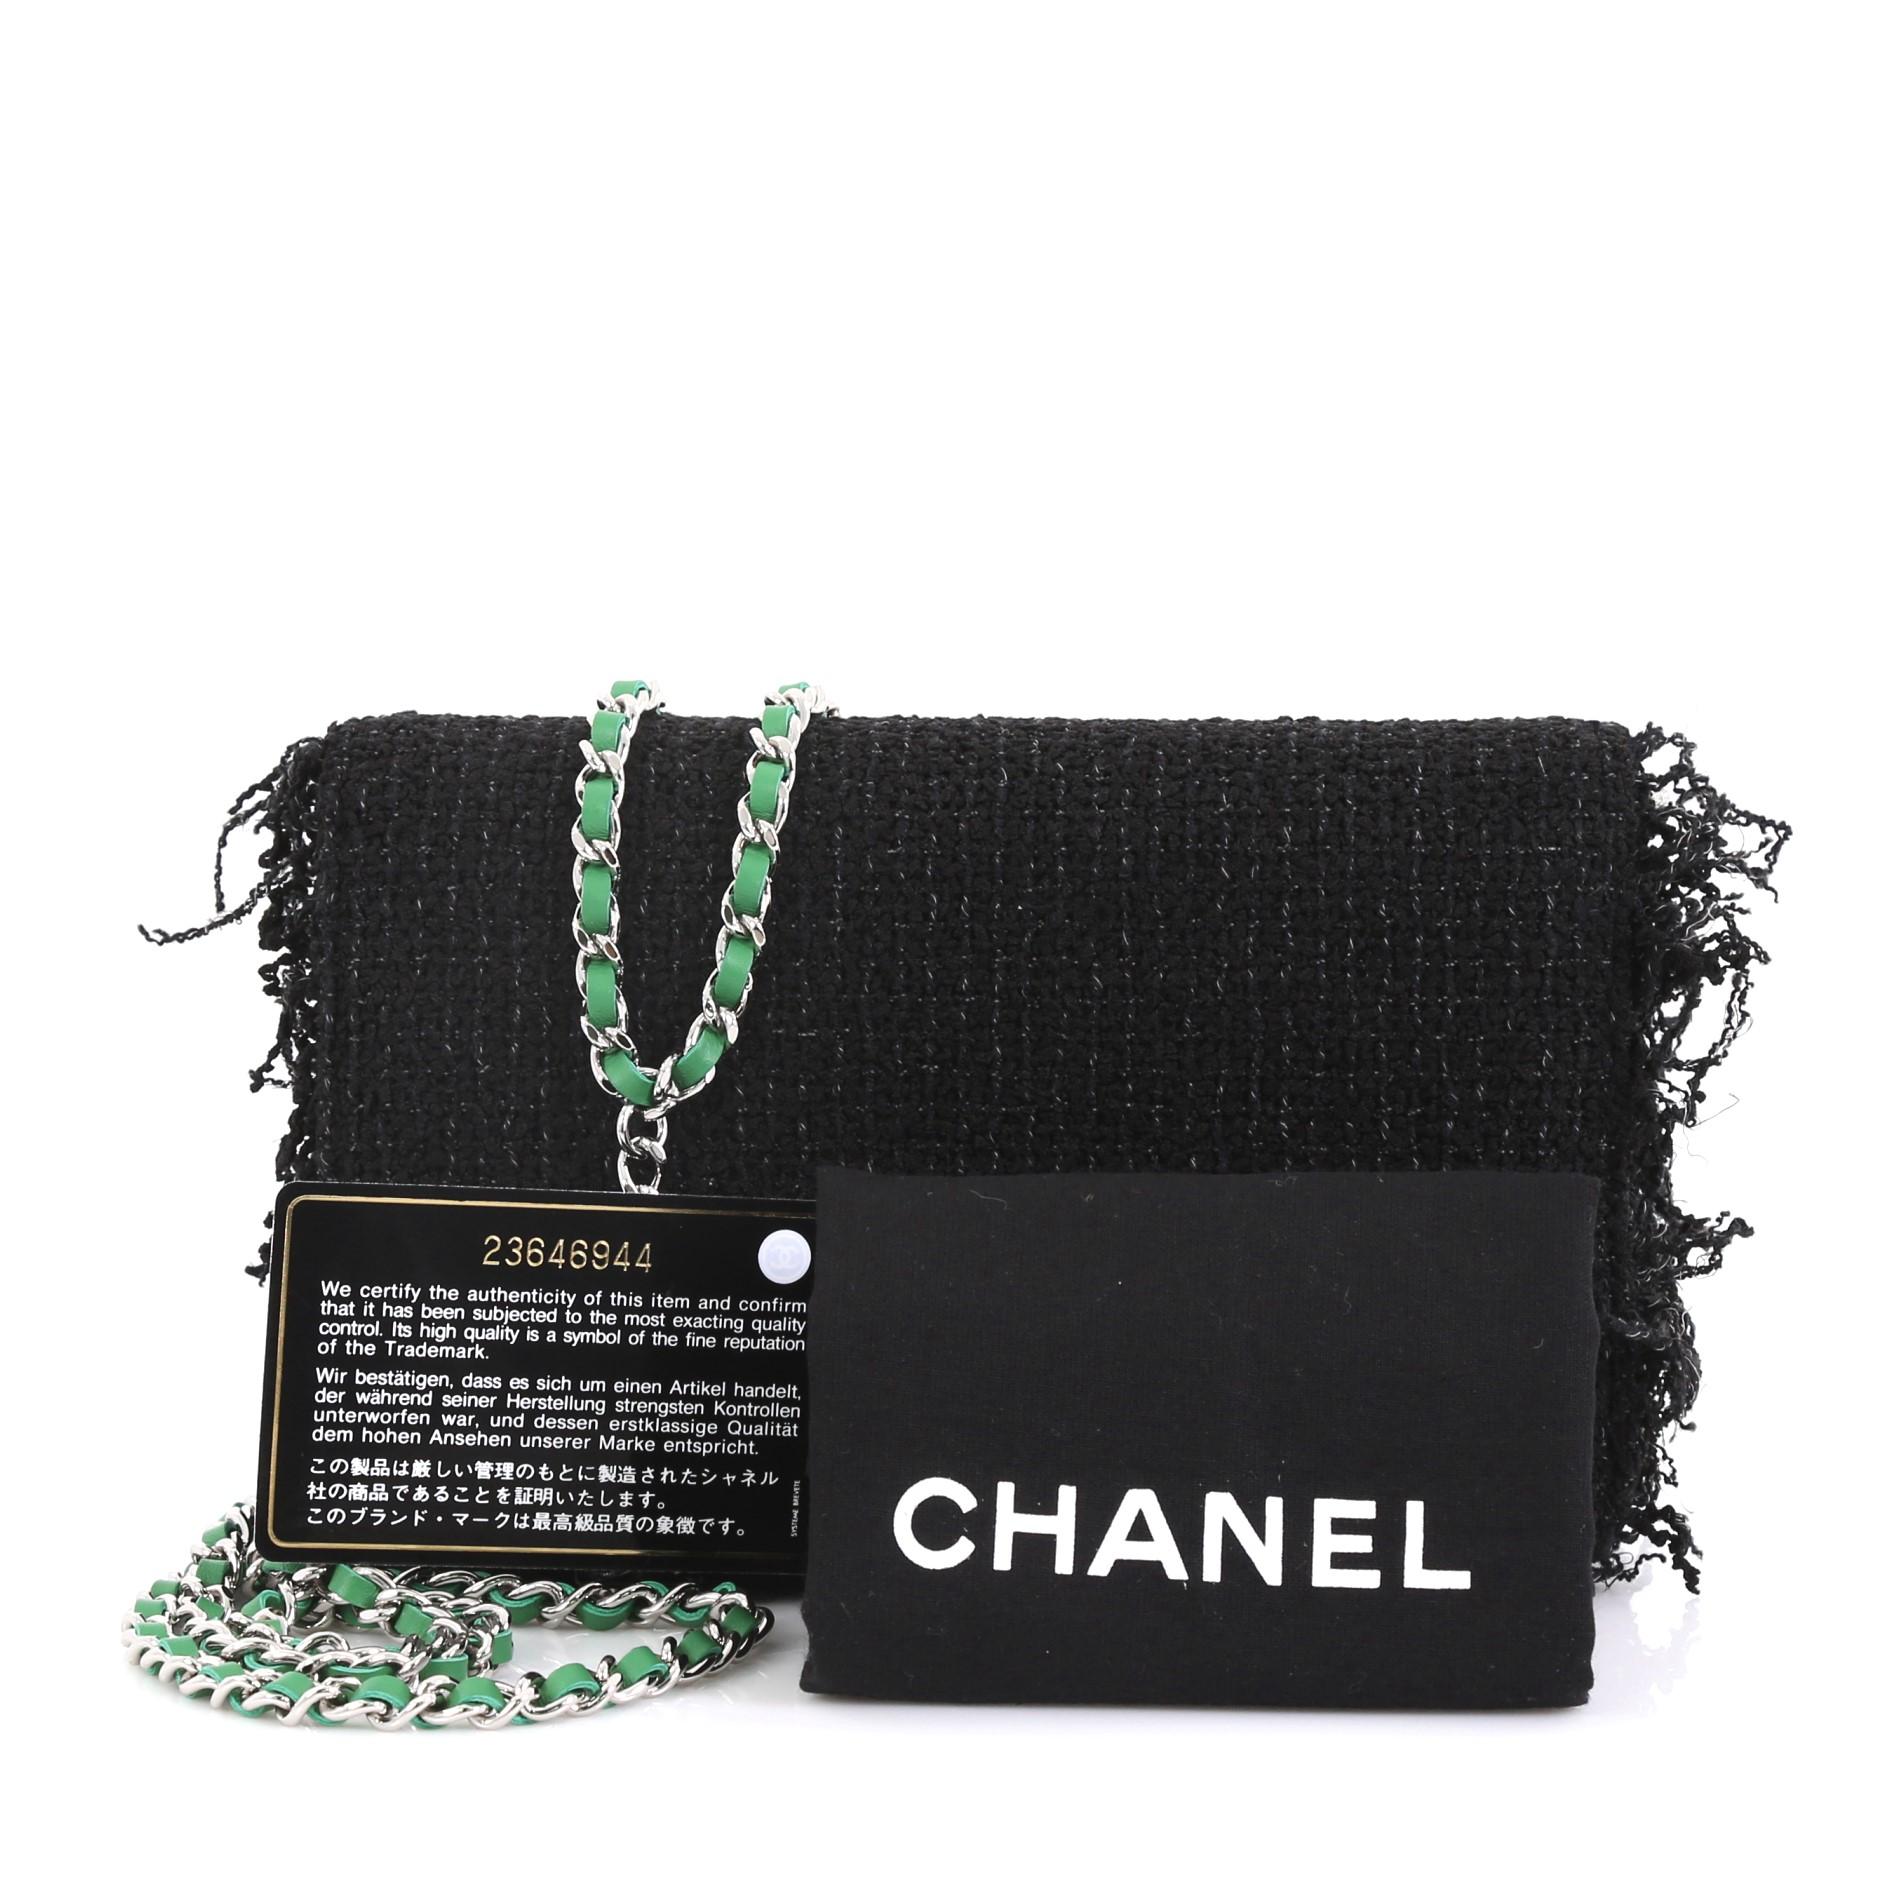 This Chanel Wallet on Chain Fringe Tweed, crafted in black fringe tweed, features woven-in leather chain strap, CC logo at front flap and silver-tone hardware. Its magnetic snap button closure opens to a green fabric interior with multiple card